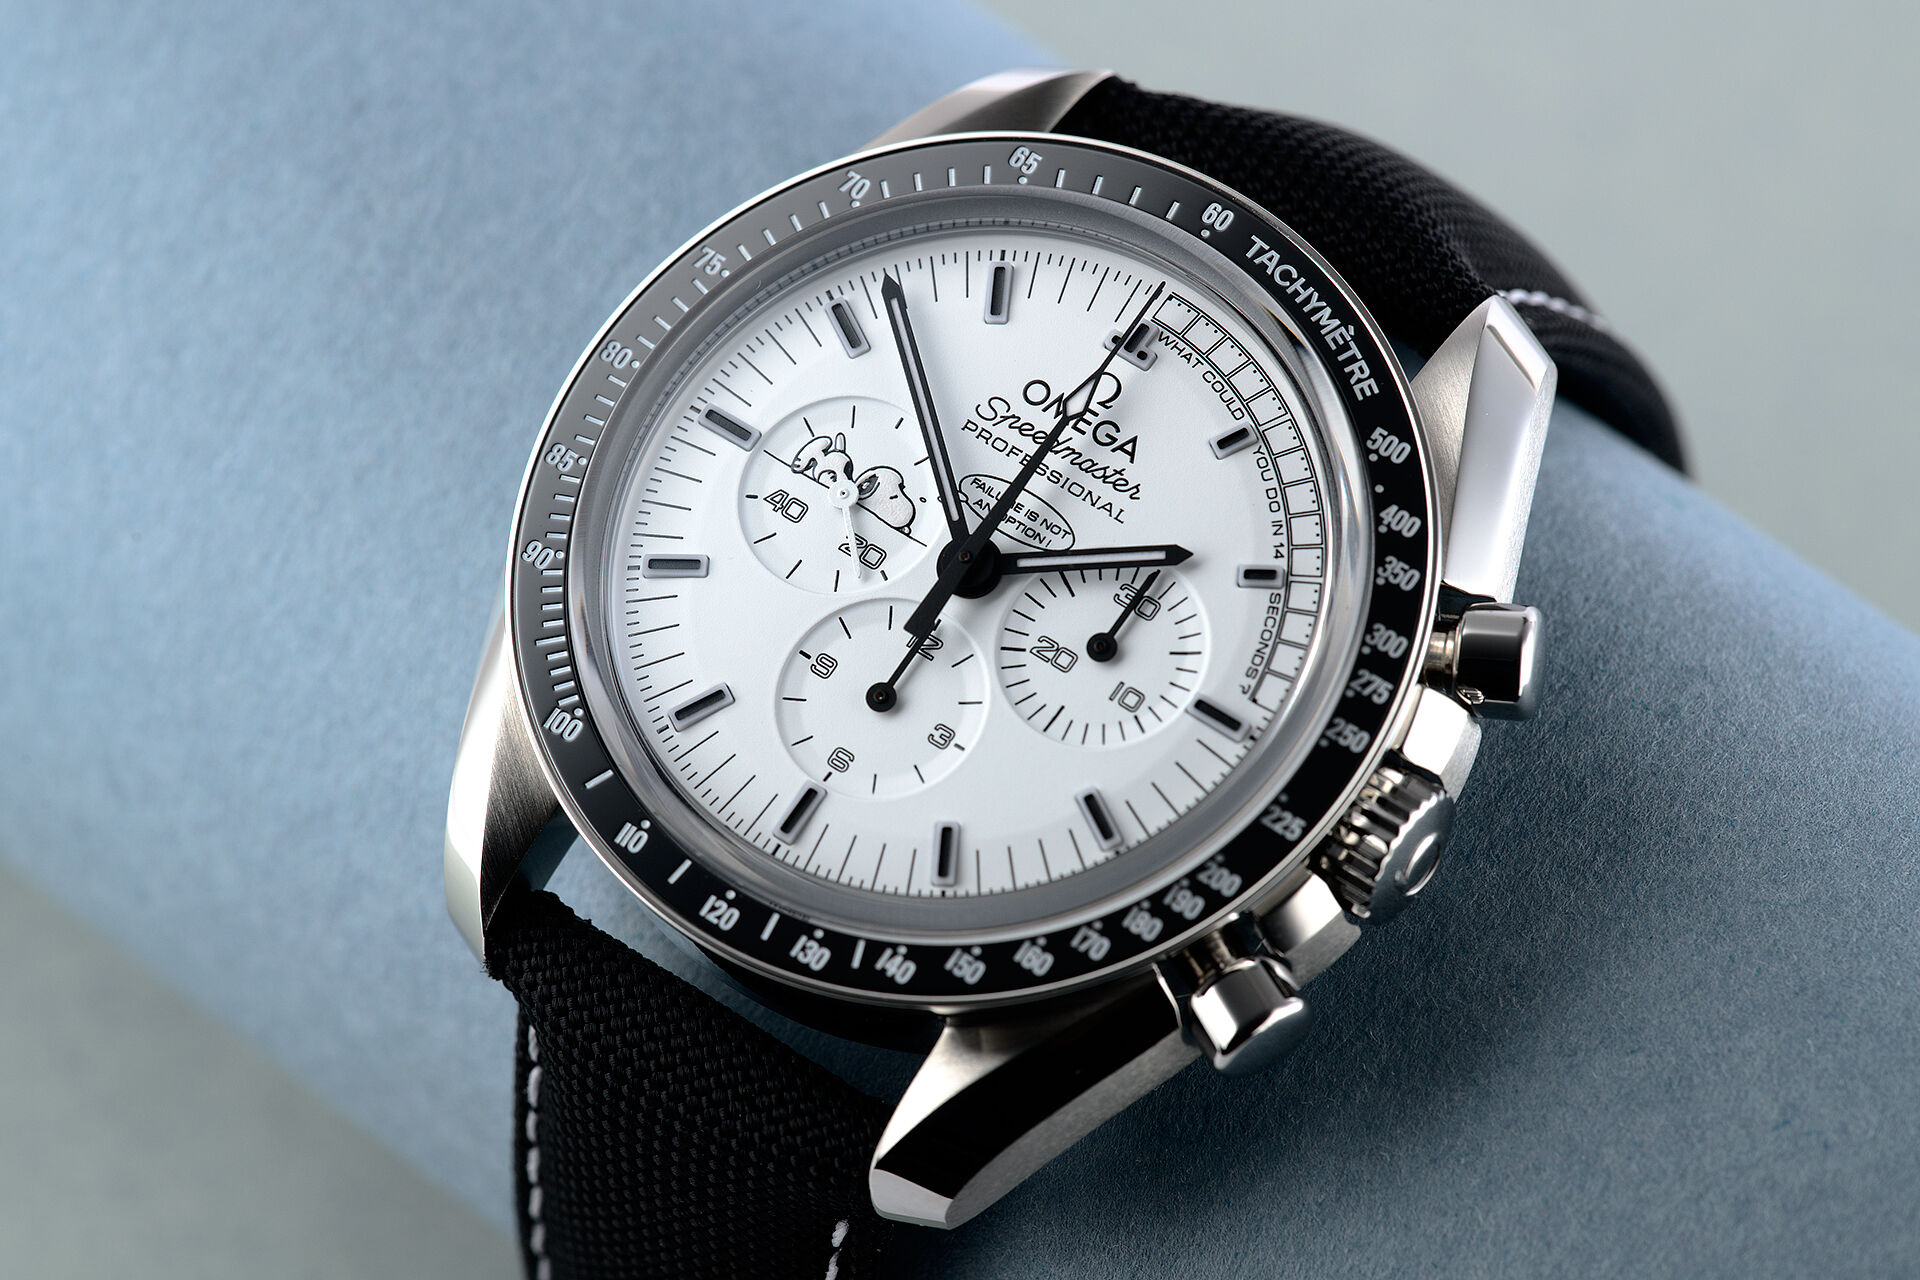 ref 311.32.42.30.04.003 | Limited Edition 1970 Pieces  | Omega Speedmaster Moonwatch Anniversary